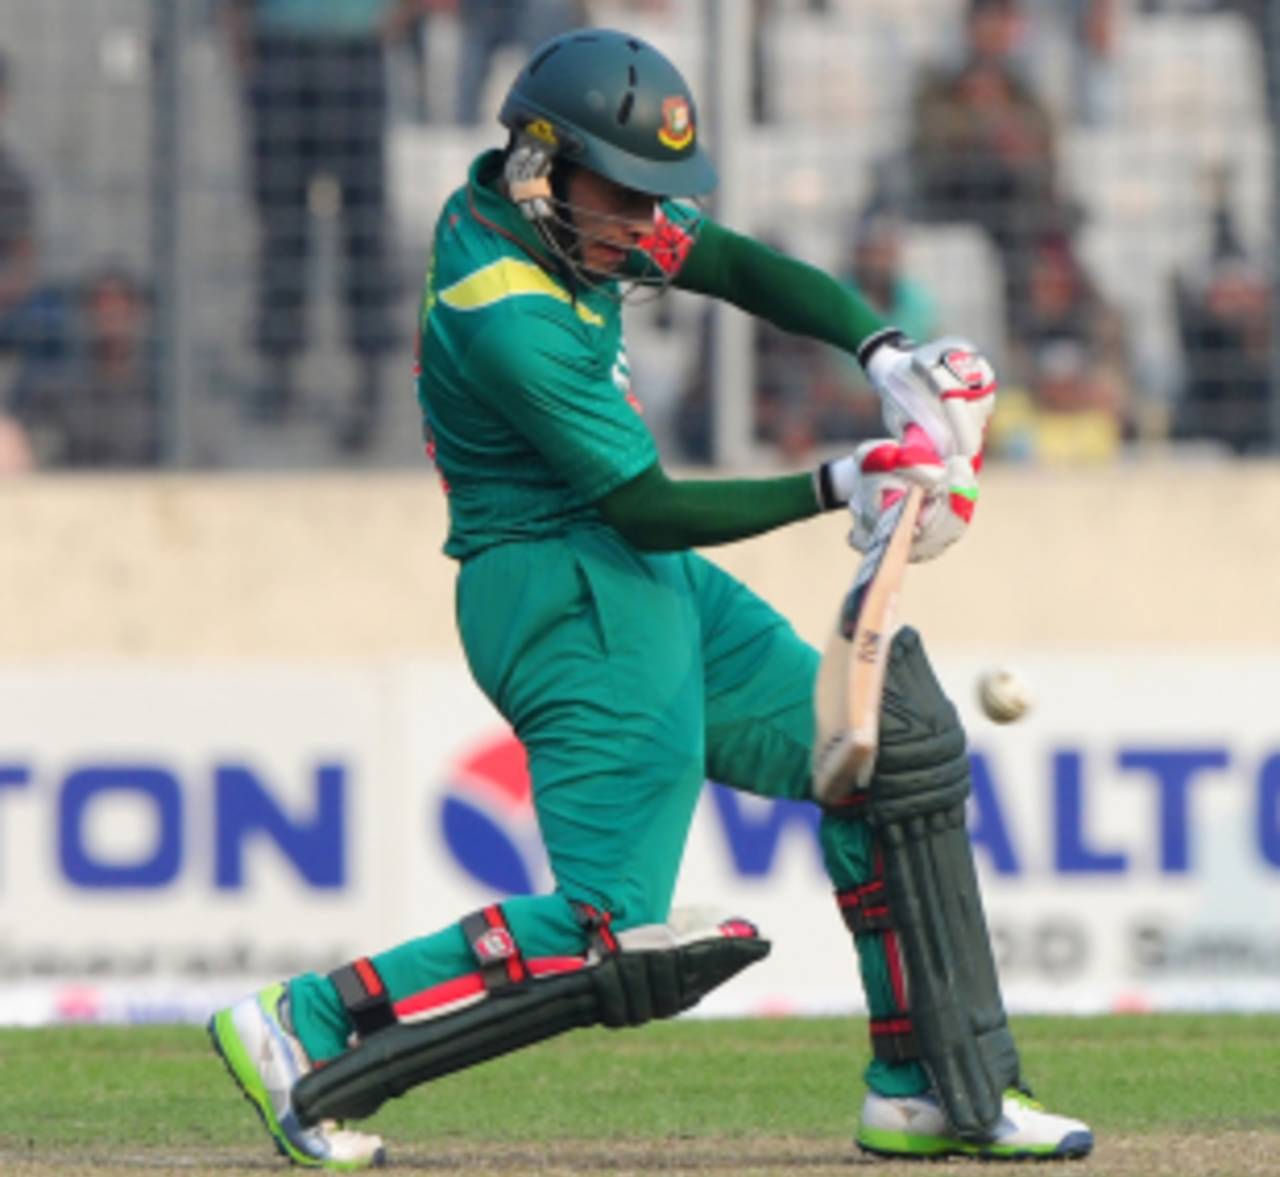 Mushfiqur Rahim will not keep wickets on Monday as he doesn't want to risk aggravating a finger injury&nbsp;&nbsp;&bull;&nbsp;&nbsp;AFP